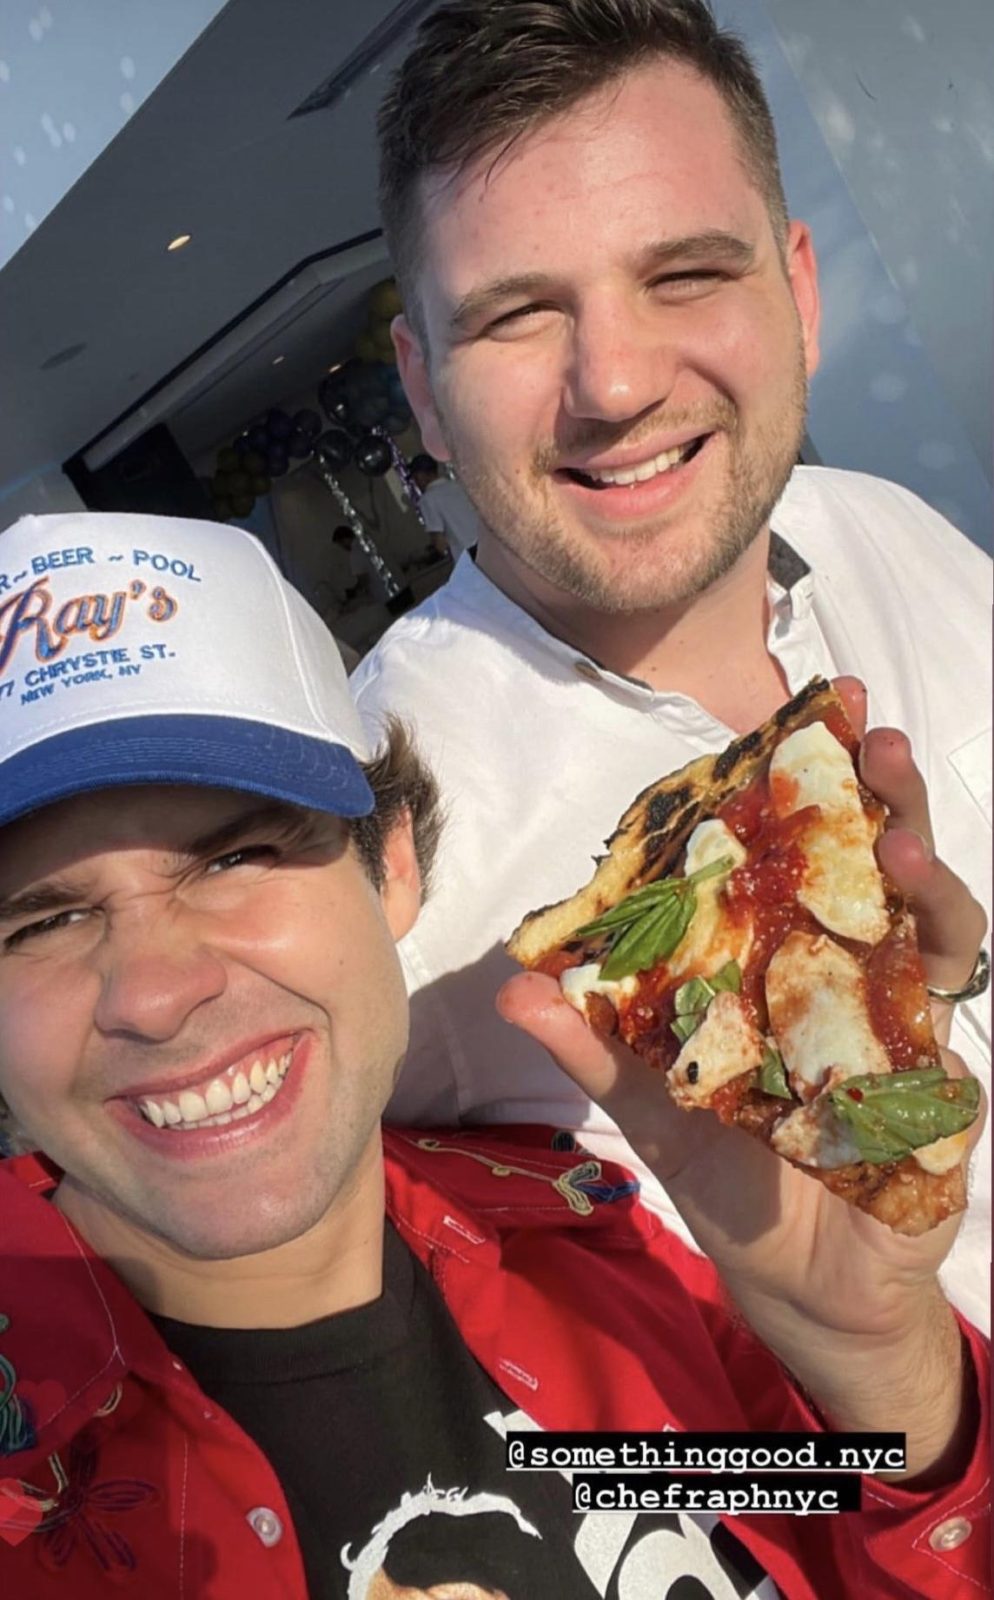 David Dobrik's New Pizza Place Gets Early Morning Campers for Opening